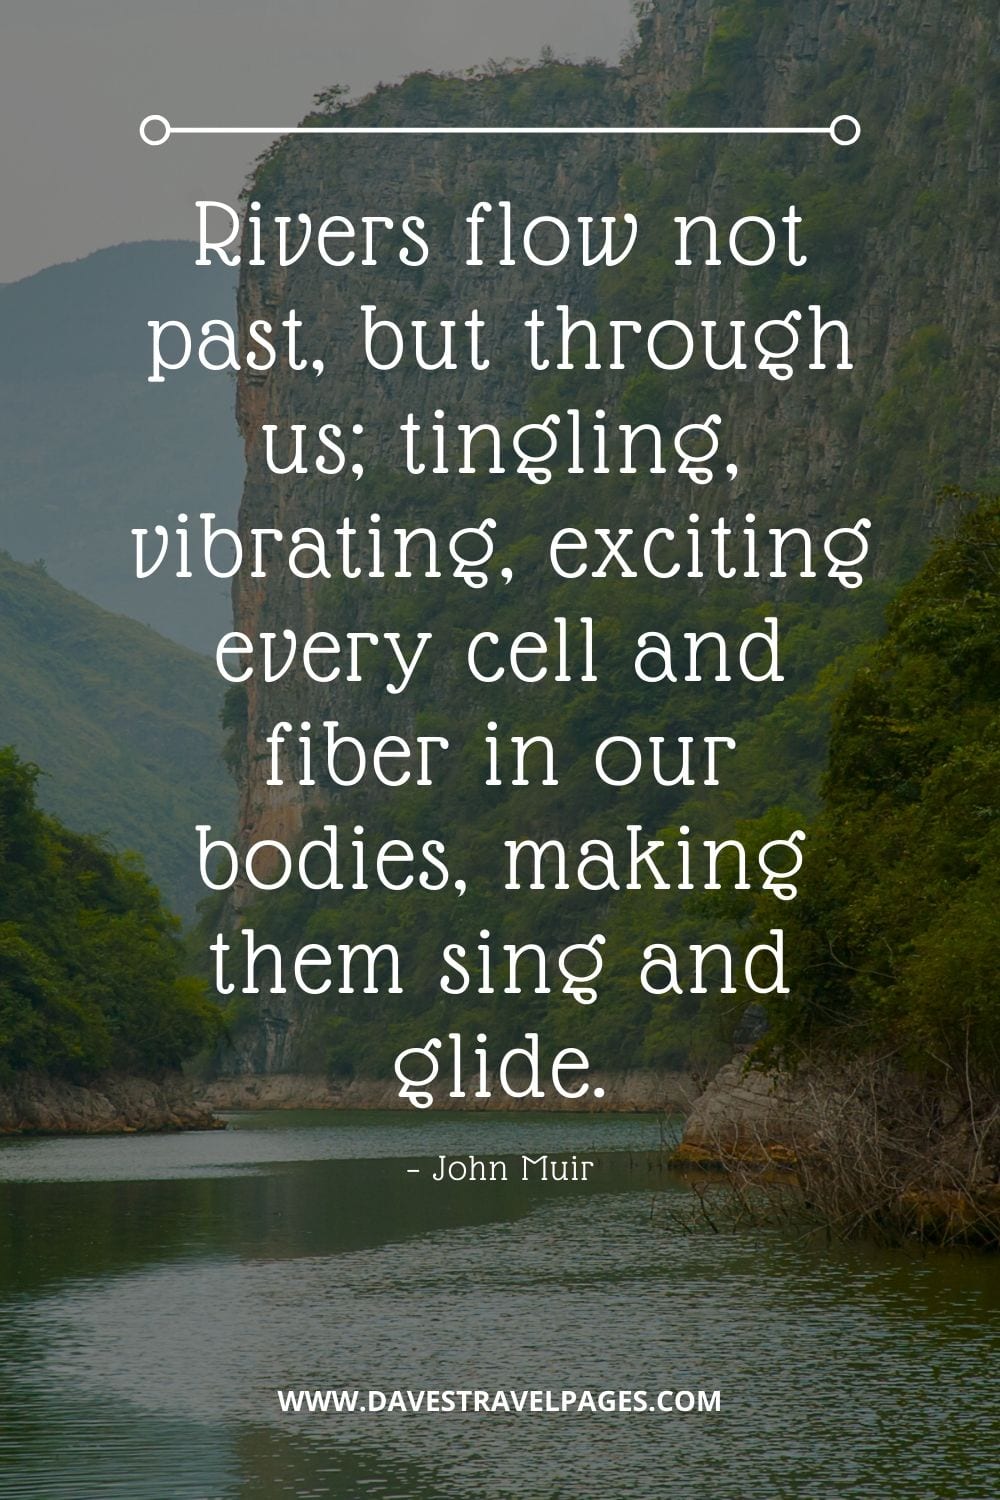 John Muir Nature Quotes - “Rivers flow not past, but through us; tingling, vibrating, exciting every cell and fiber in our bodies, making them sing and glide.” 